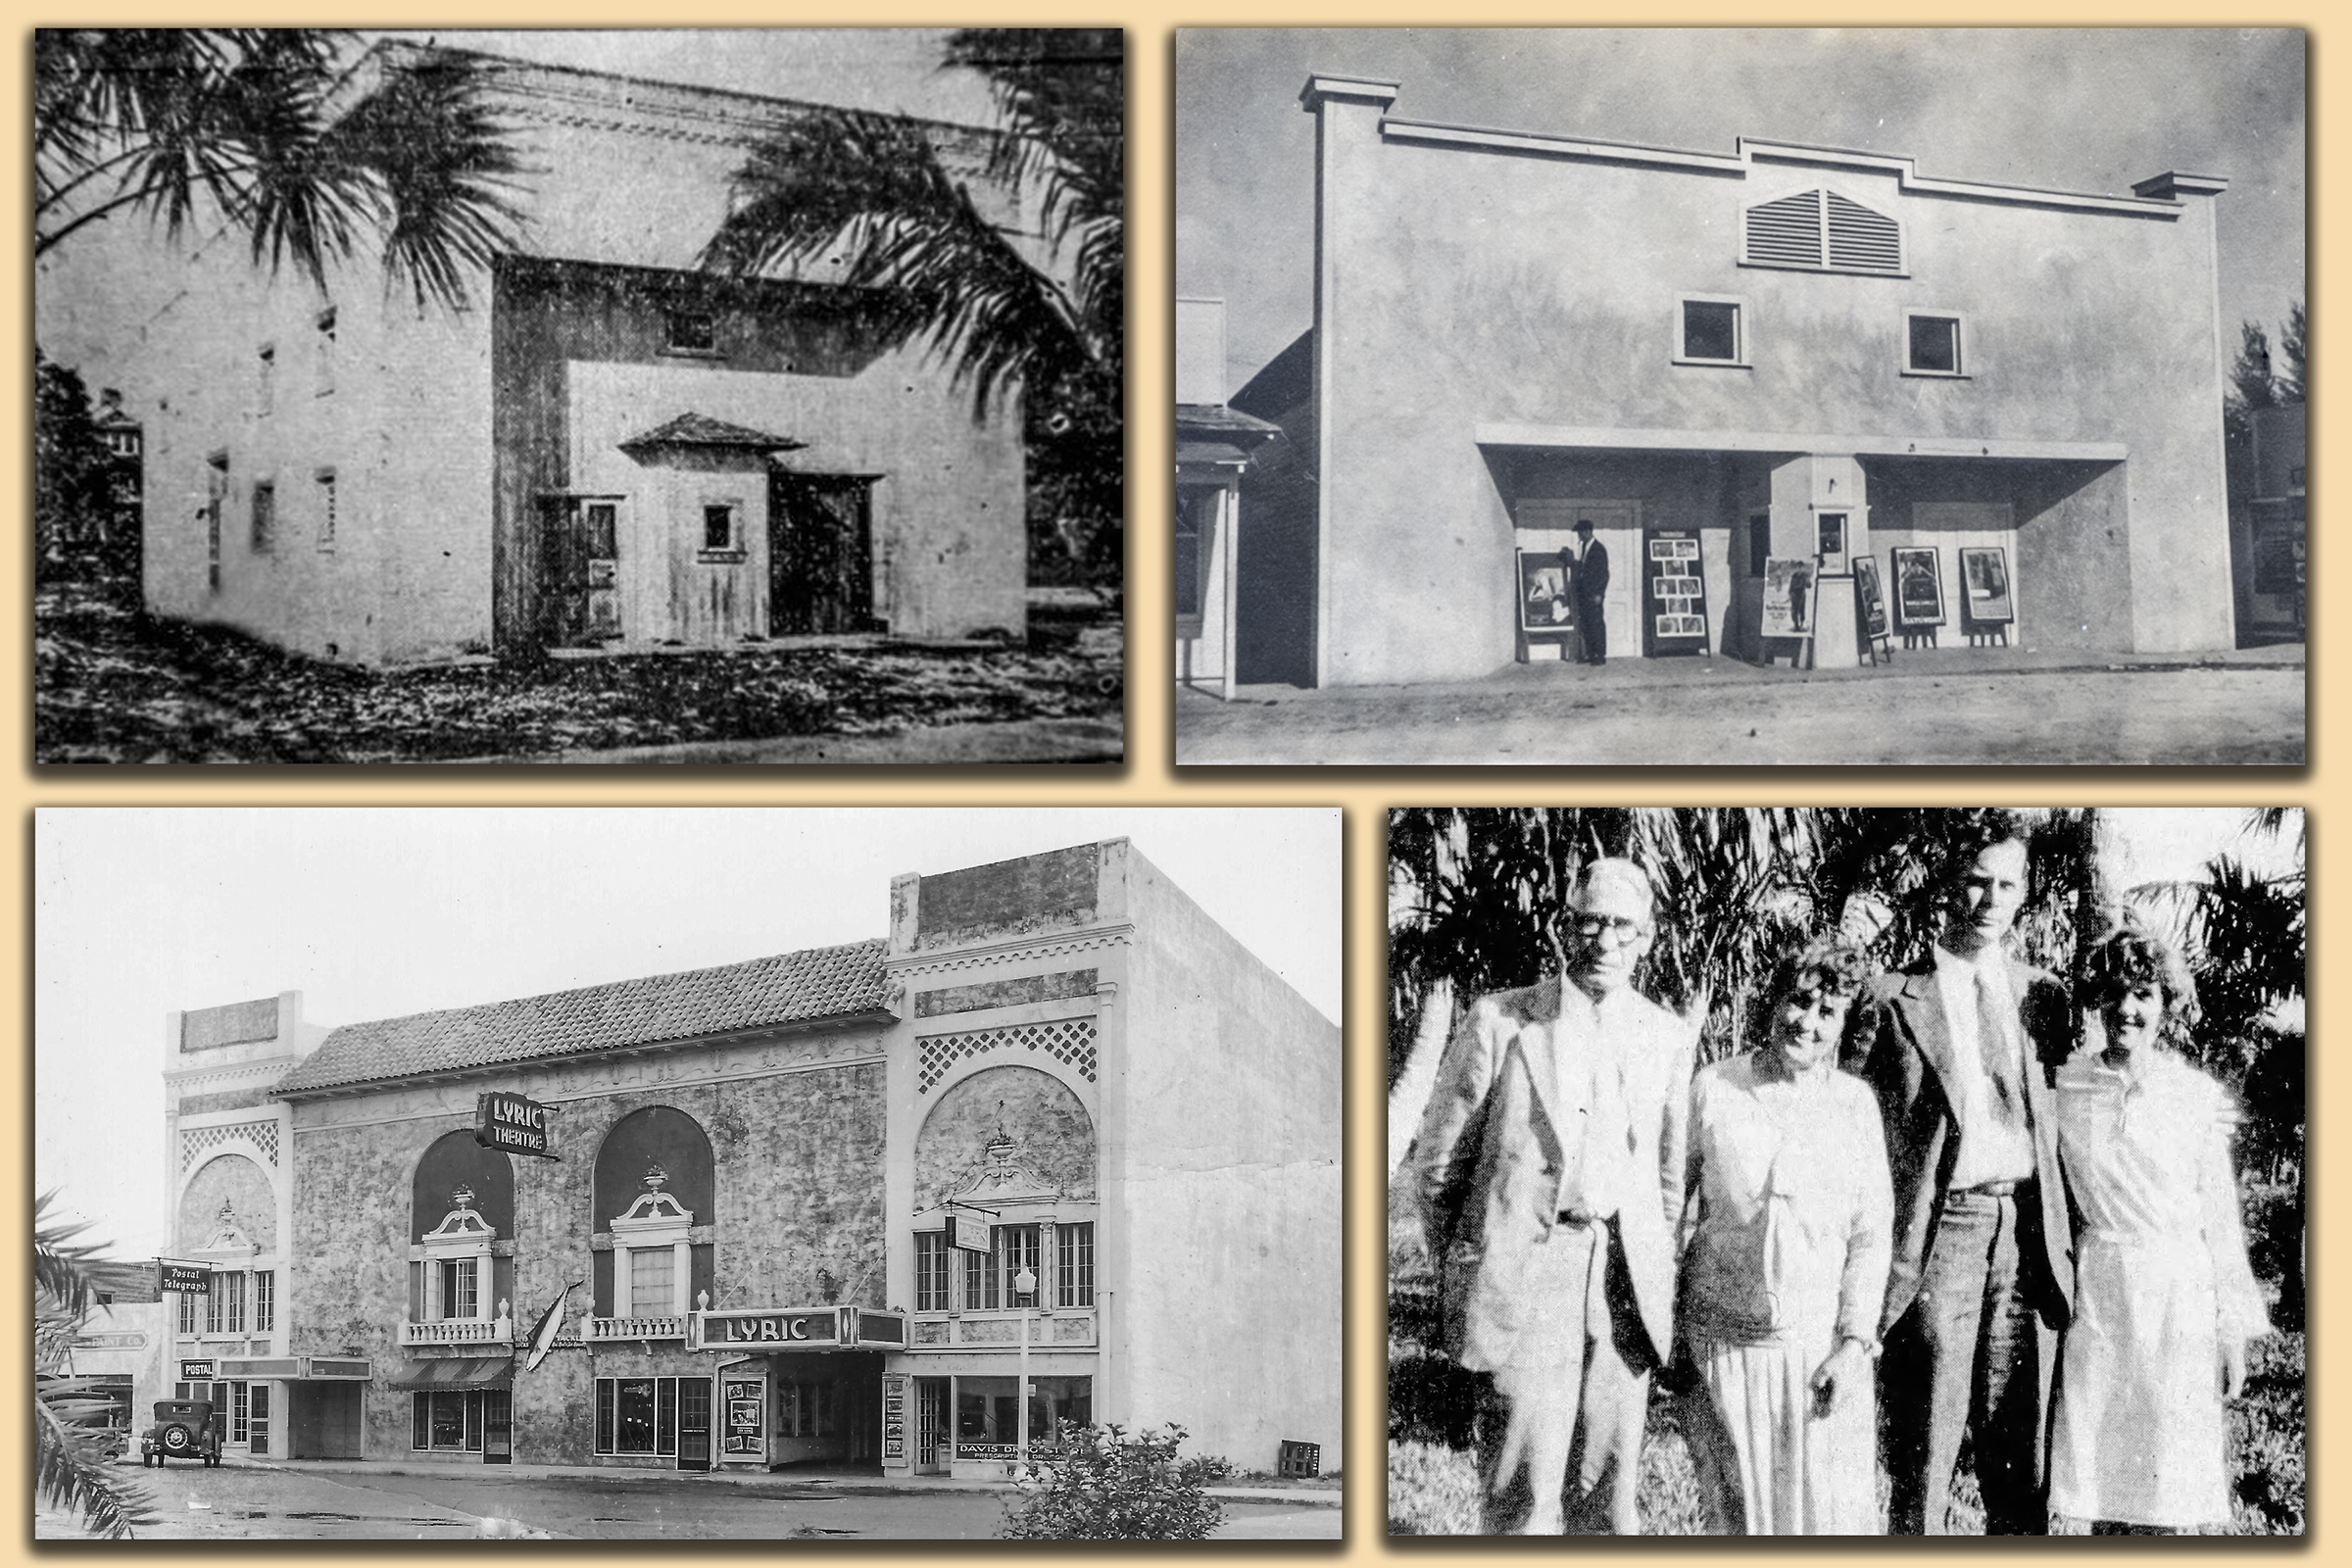 Three Lyric Theatres in Stuart, Martin County, Treasure Coast, Florida. The 1895 Church of StuArt: Local history and art. Supporting the community's historic preservation and our local artists.